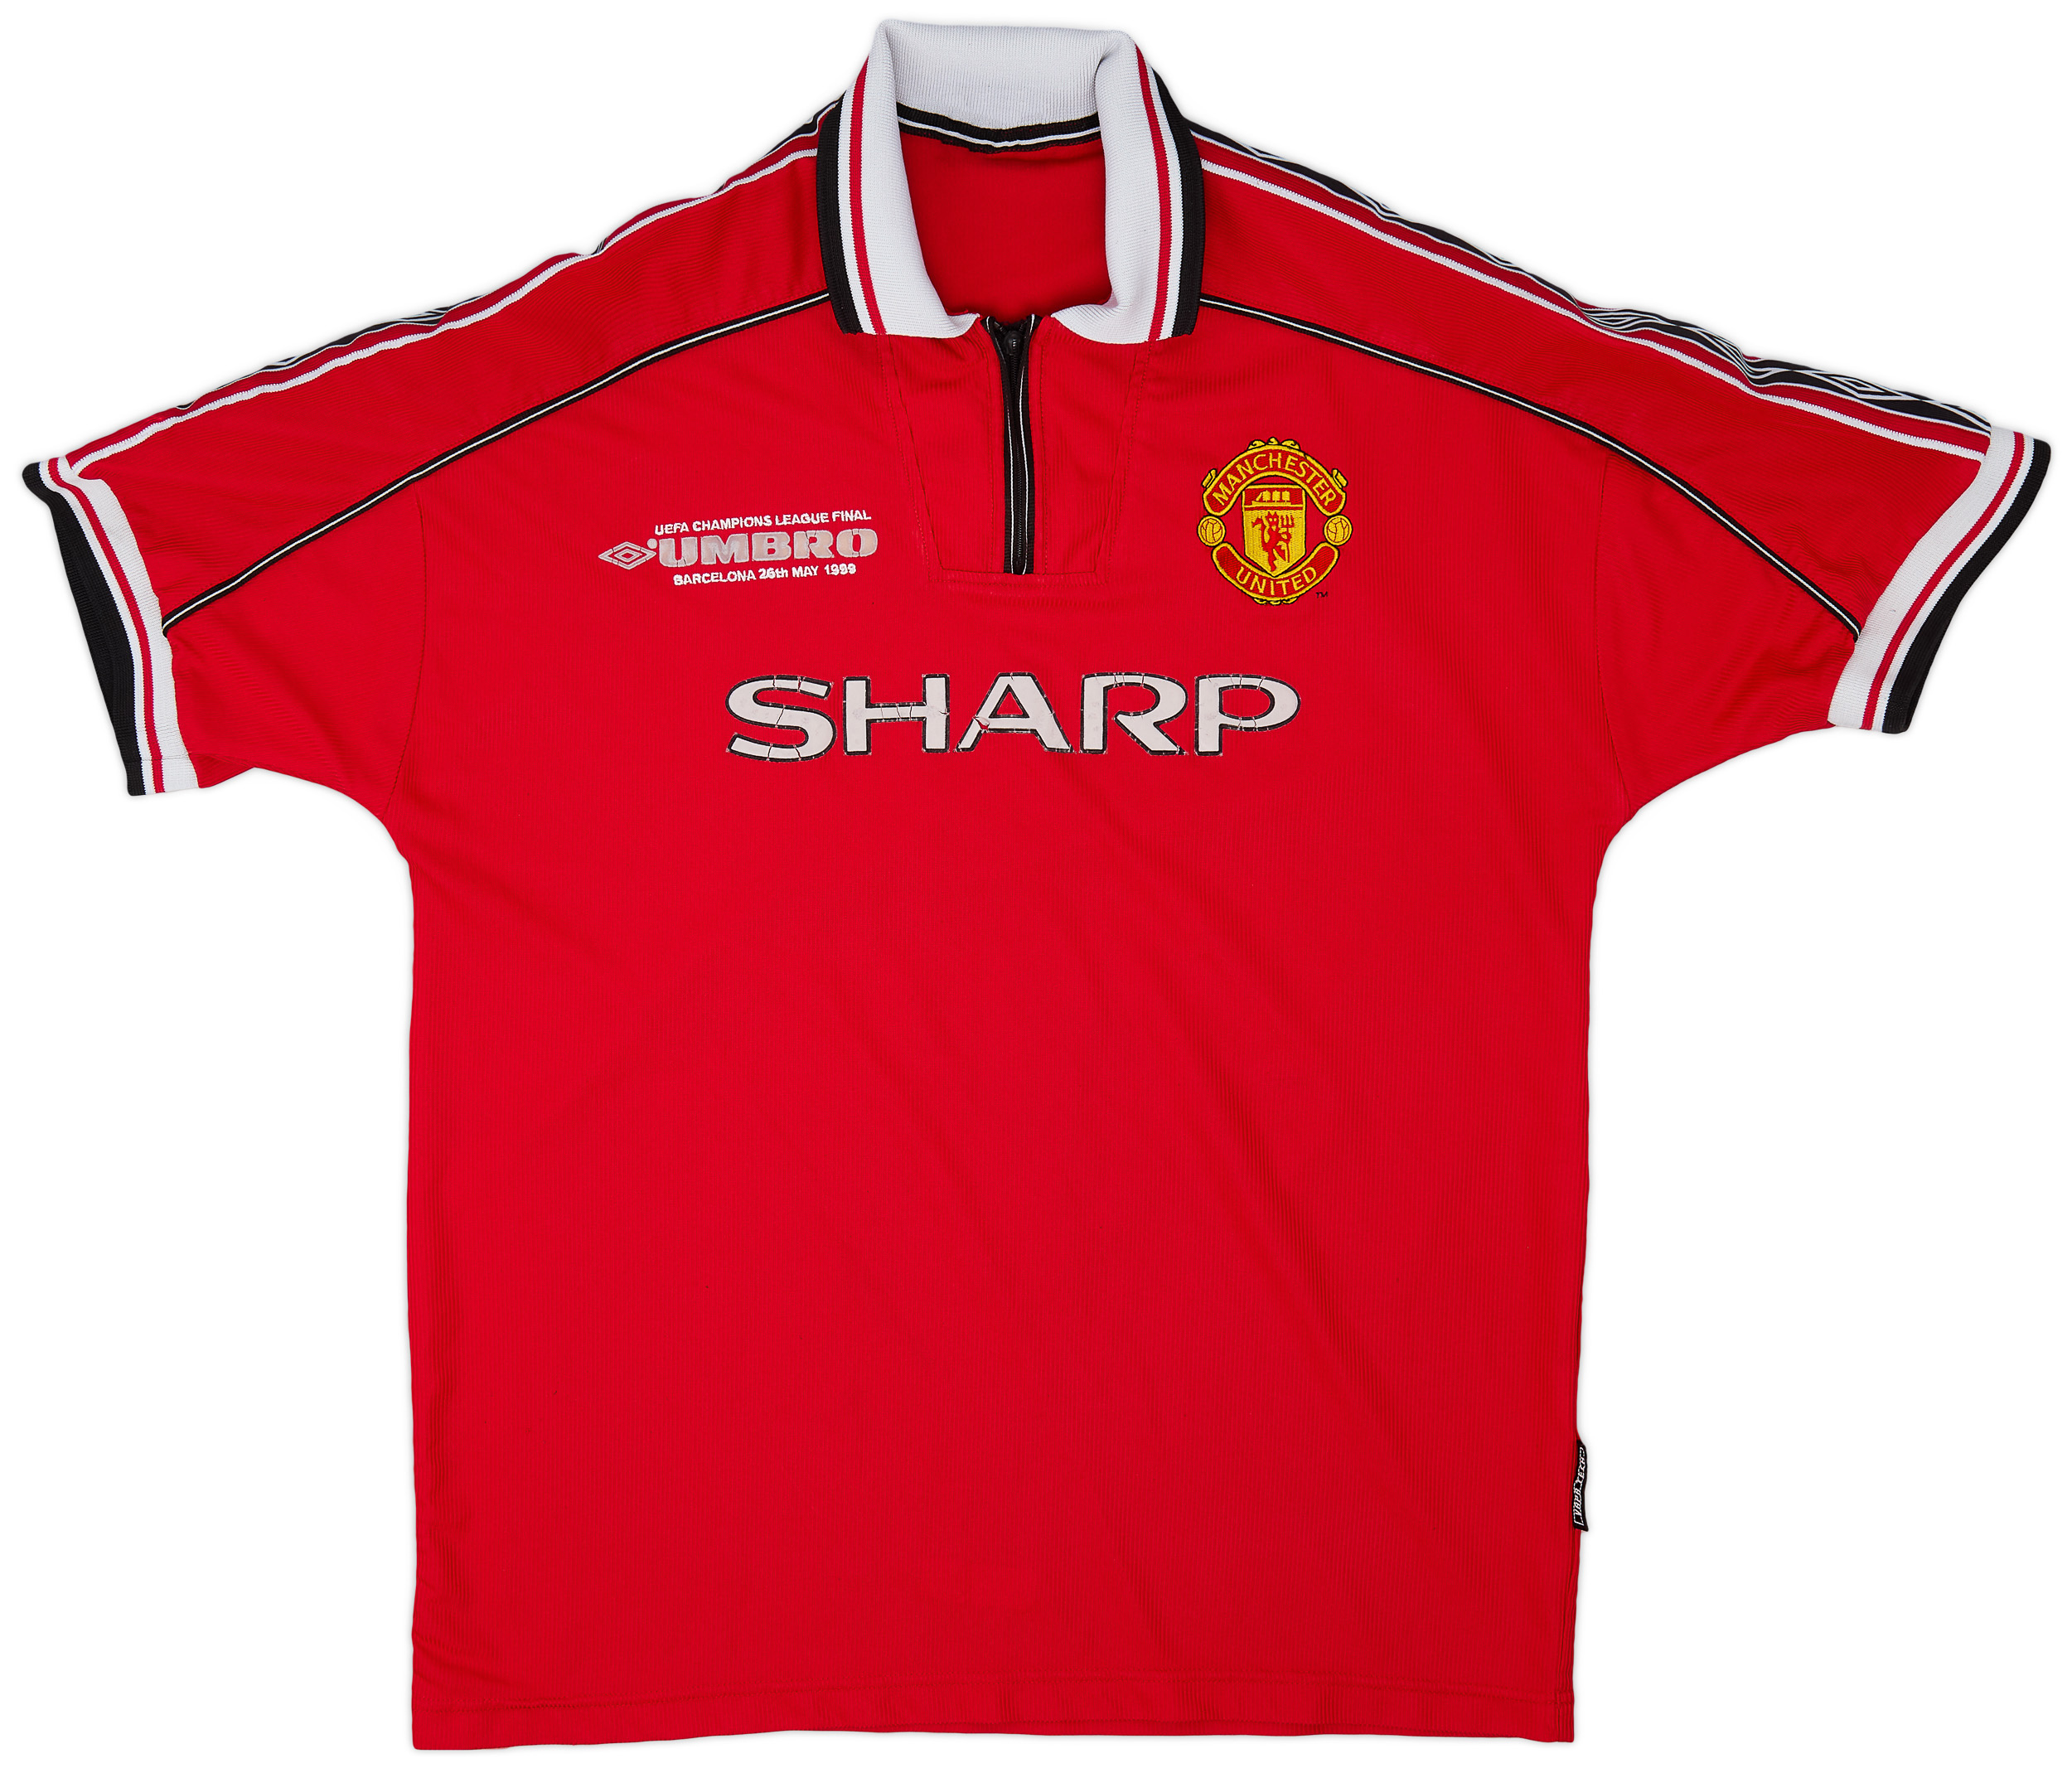 1998-00 Manchester United Home Shirt - 4/10 - ()